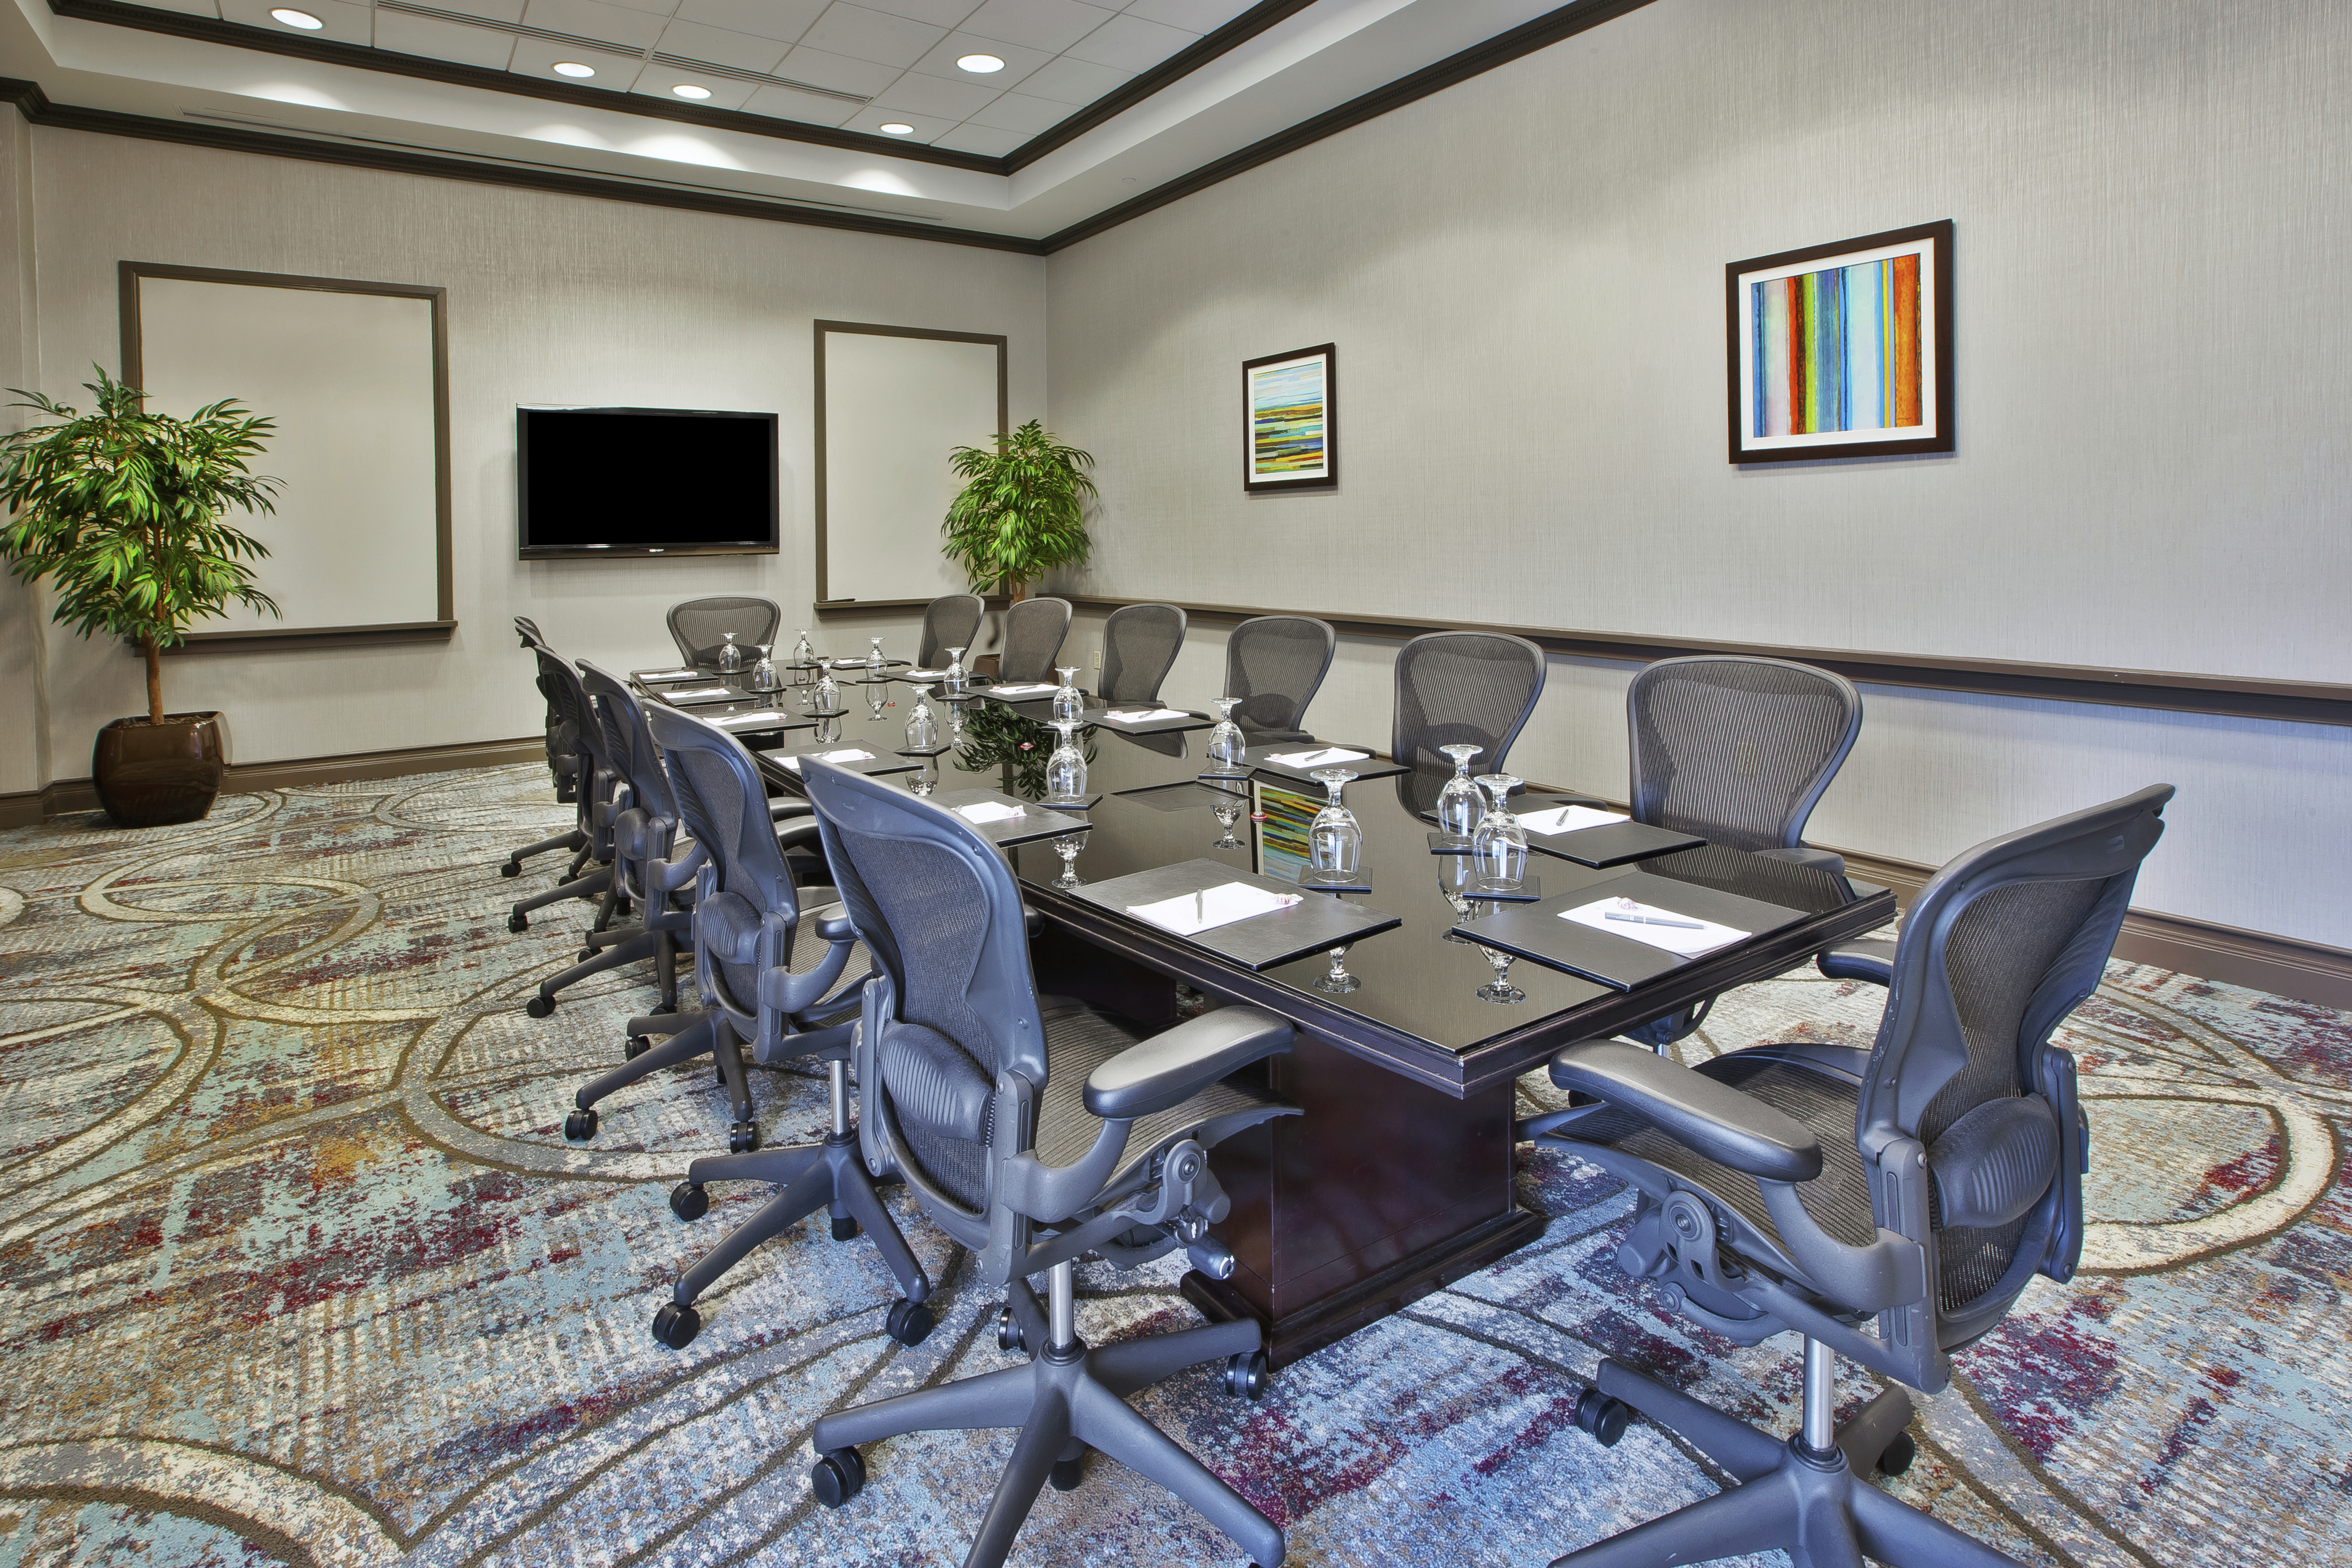 Tv Between Two White Boards, and Ergonomic Seating for 14 at Boardroom Table